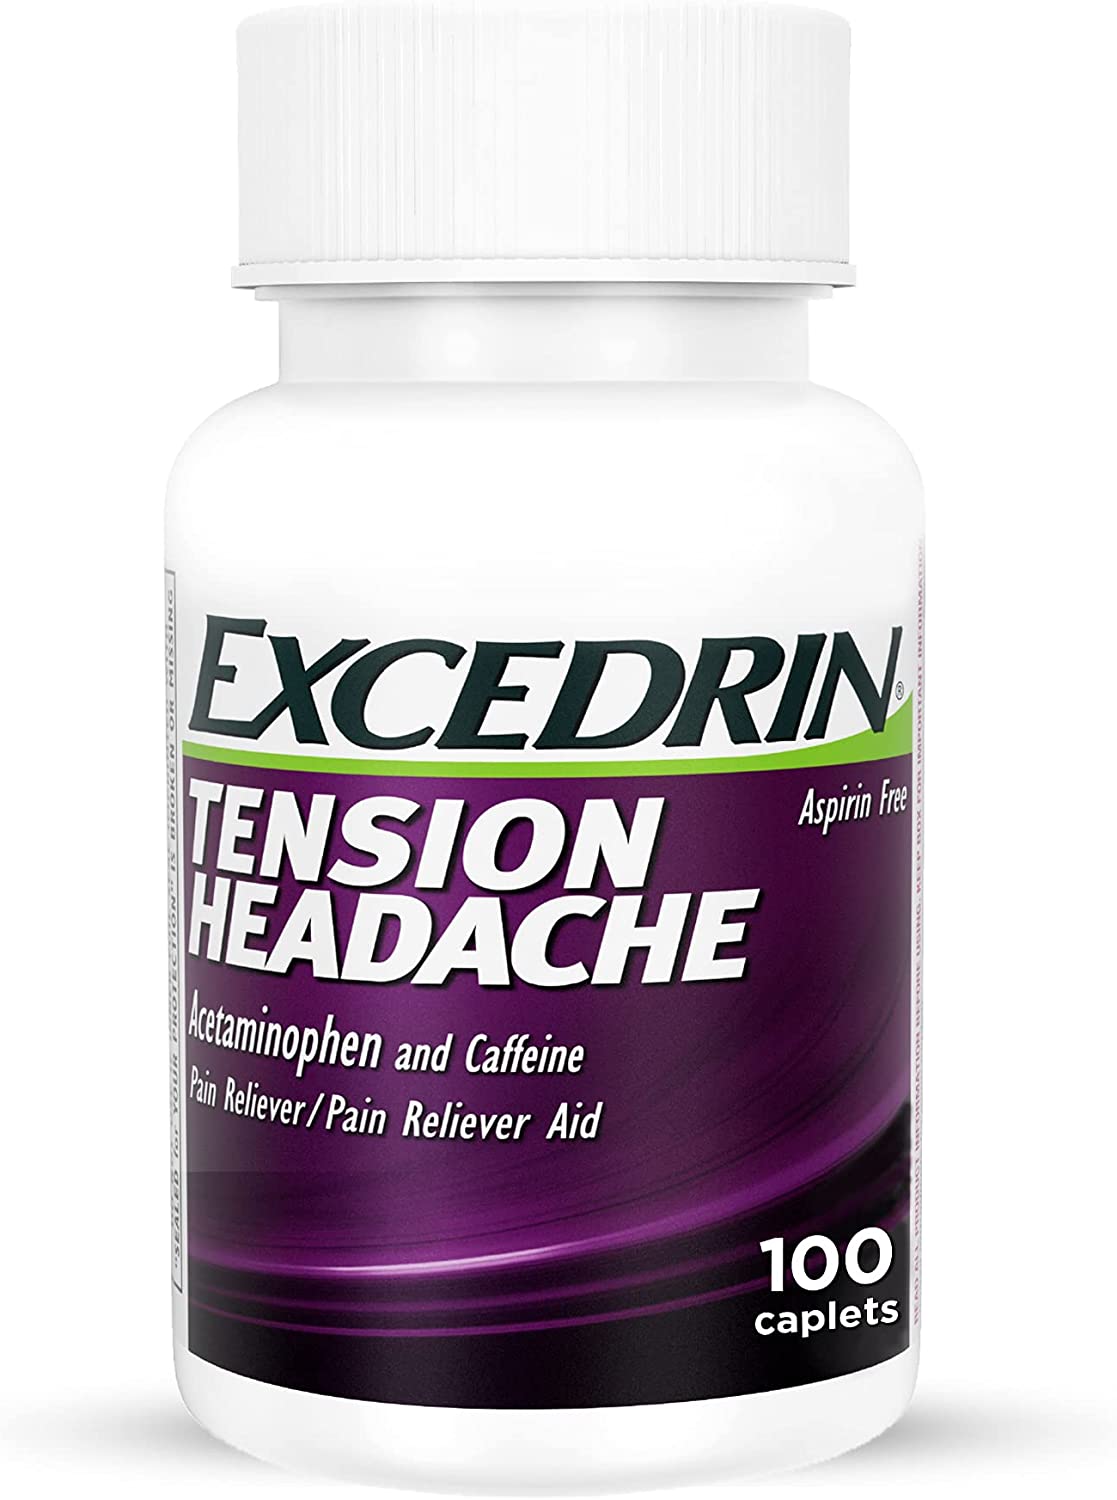 Review of Excedrin Tension Headache Relief Caplets